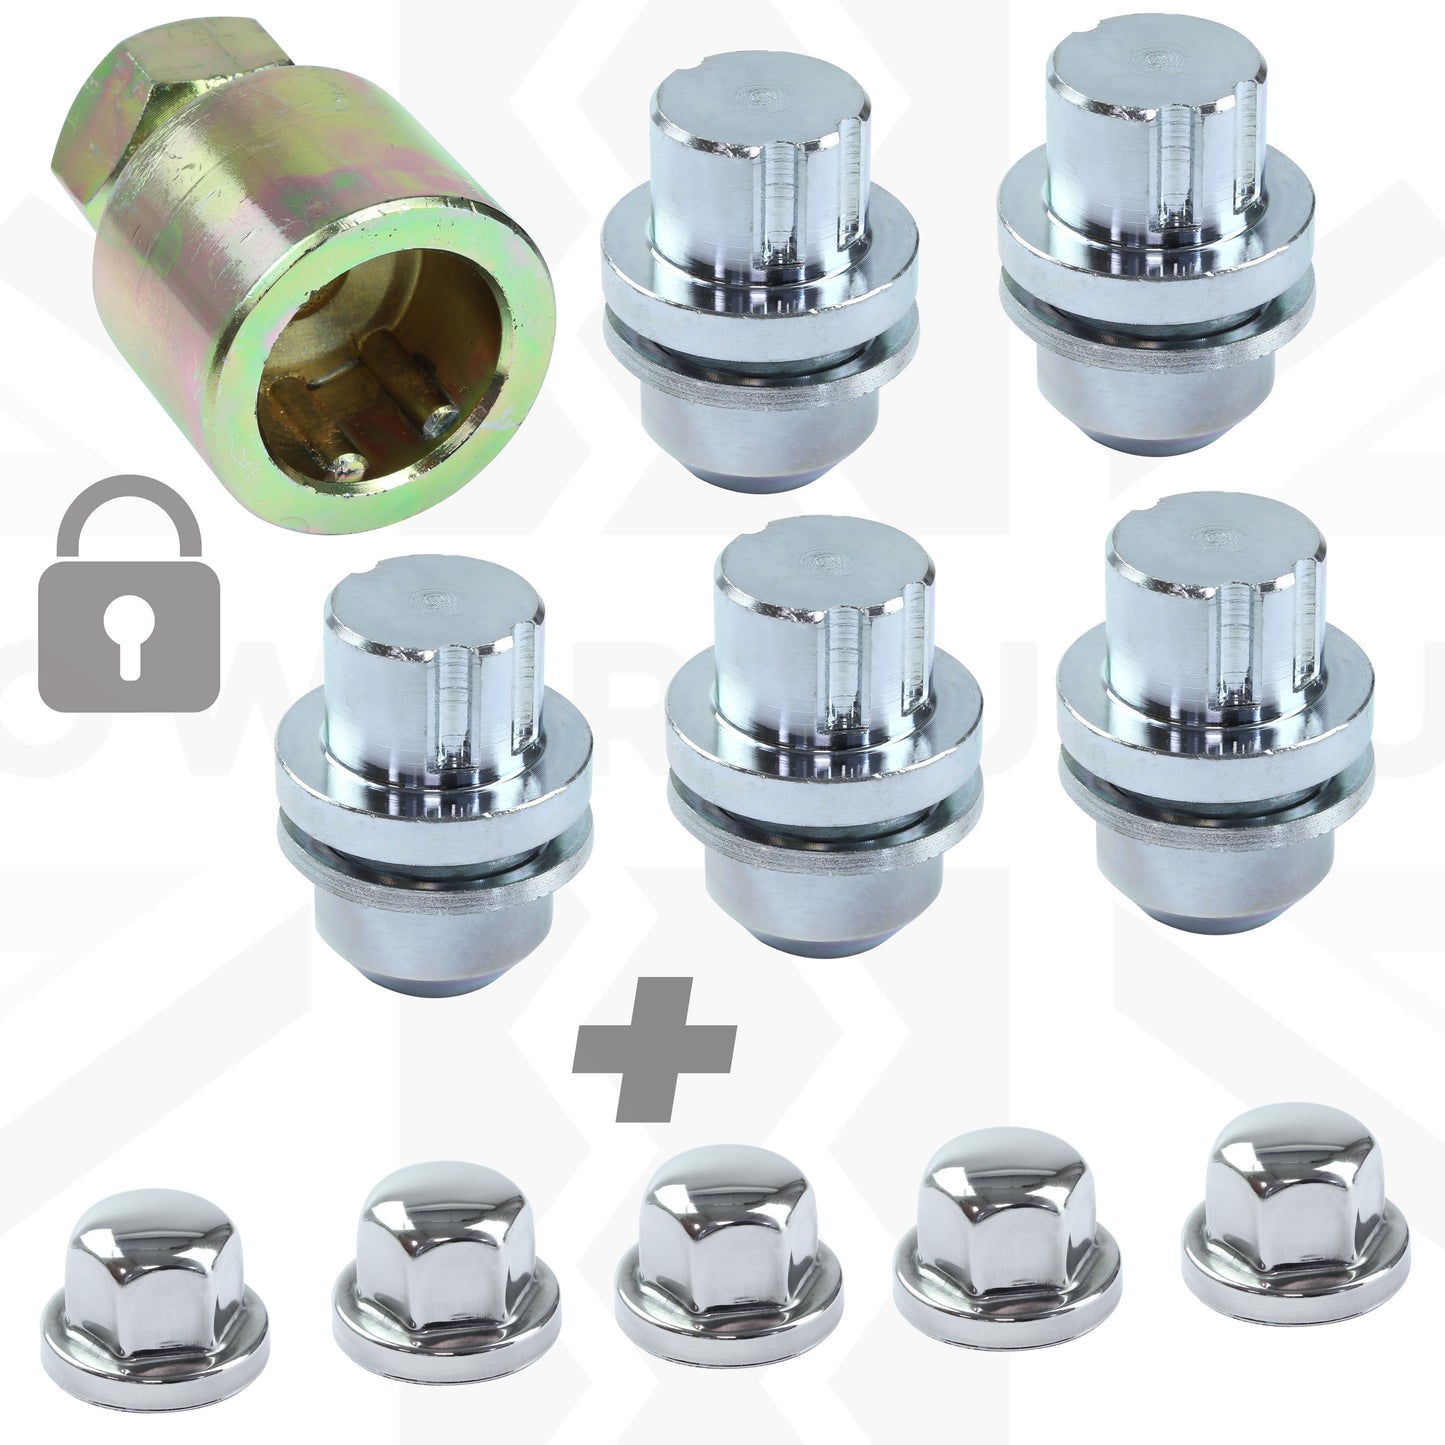 Locking Wheel Nut Kit for Land Rover Discovery 1 Alloy Wheels - Silver